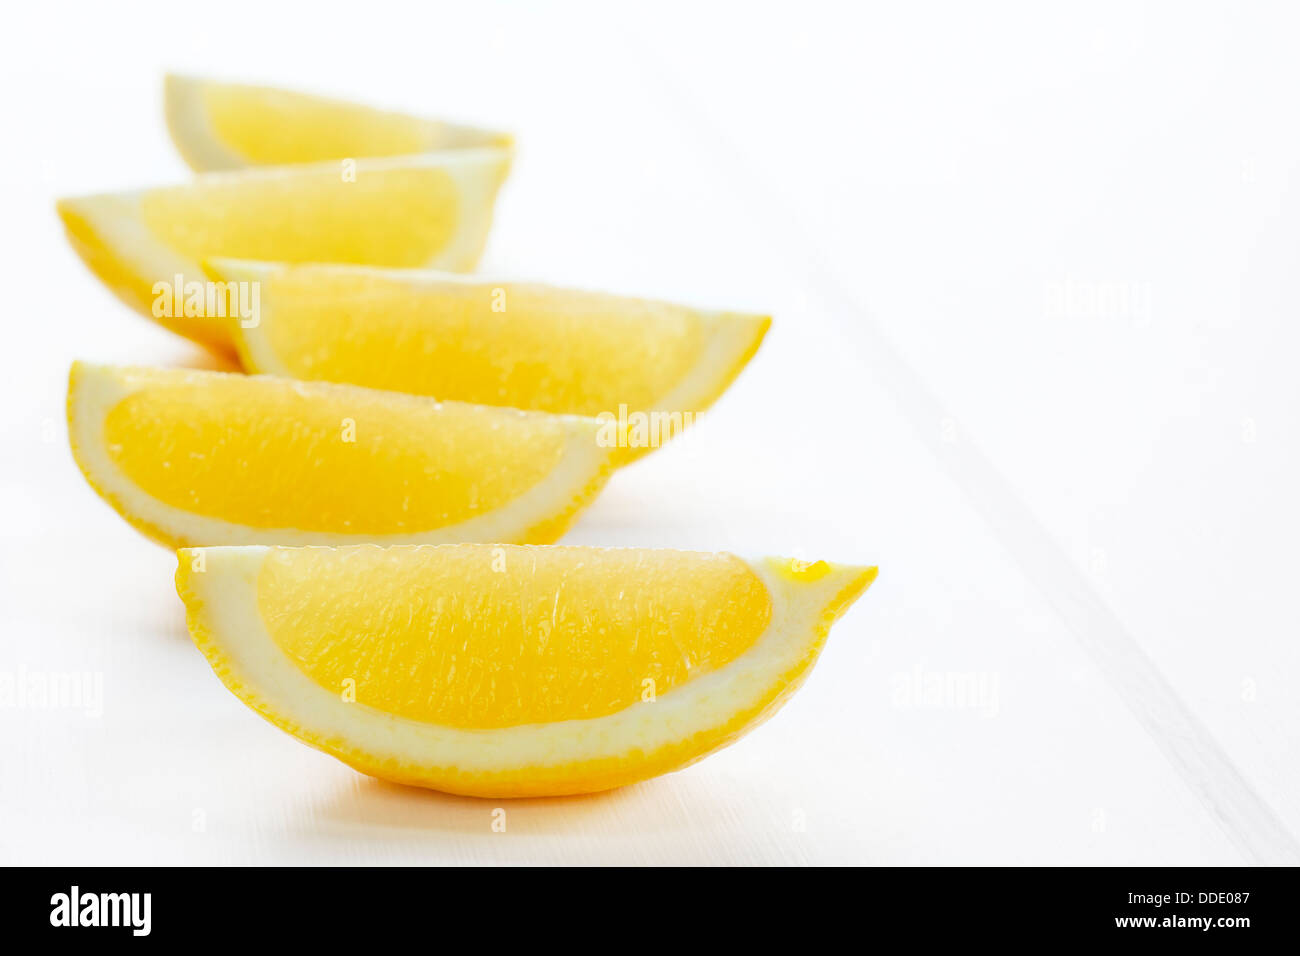 Lemon wedges or slices on a white background with soft shadows. Stock Photo